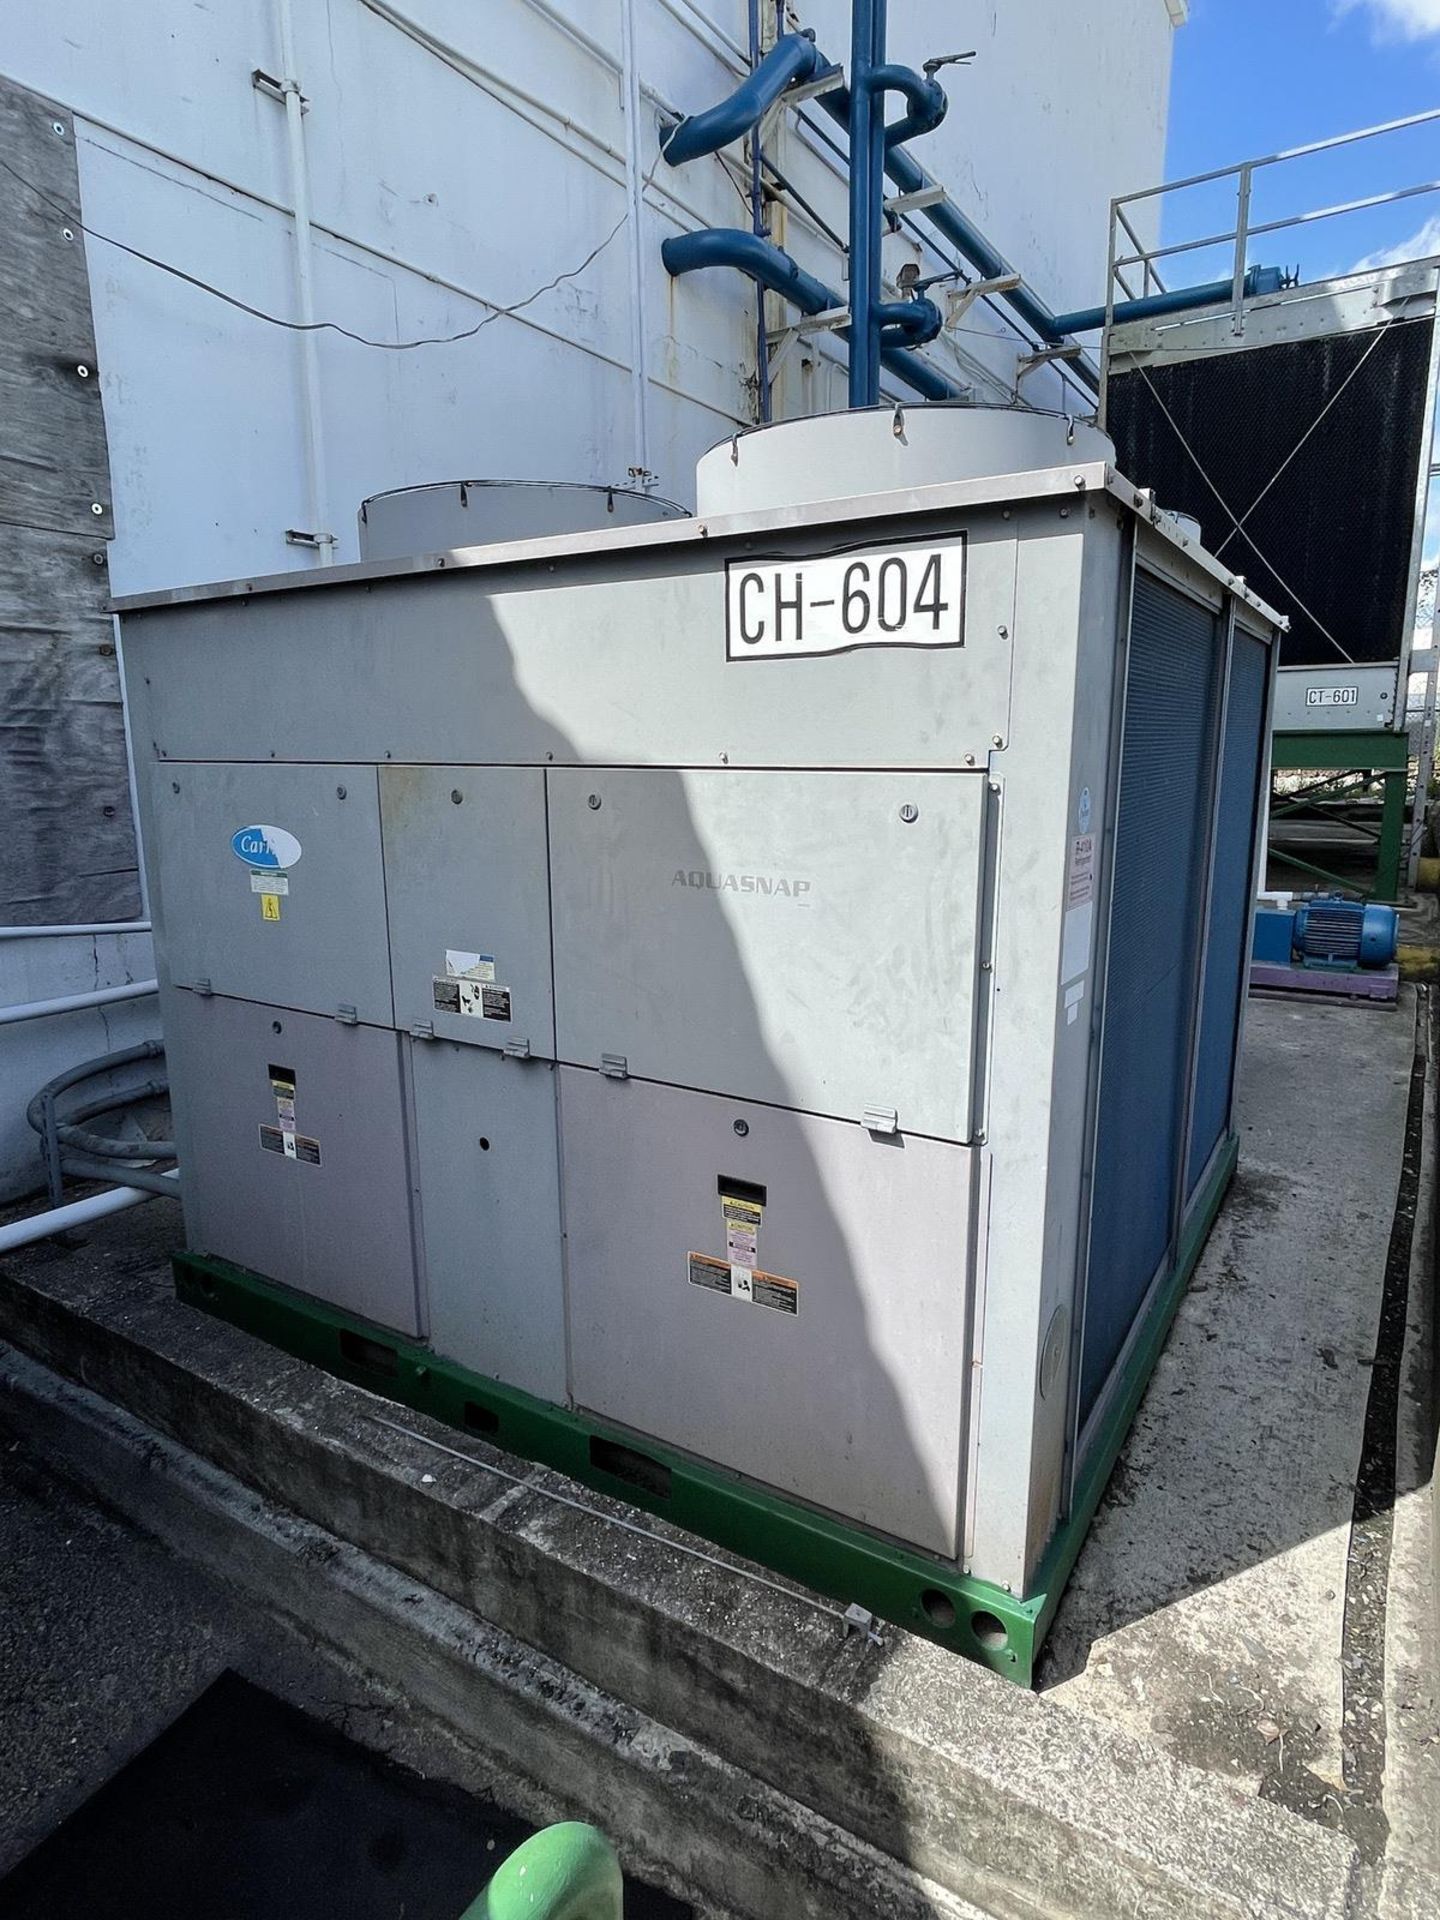 2014 Carrier Model 30RAP010-090 Aquasnap Chiller, 10 RT, Air Cooled - Subj to Bulk | Rig Fee $1000 - Image 3 of 9